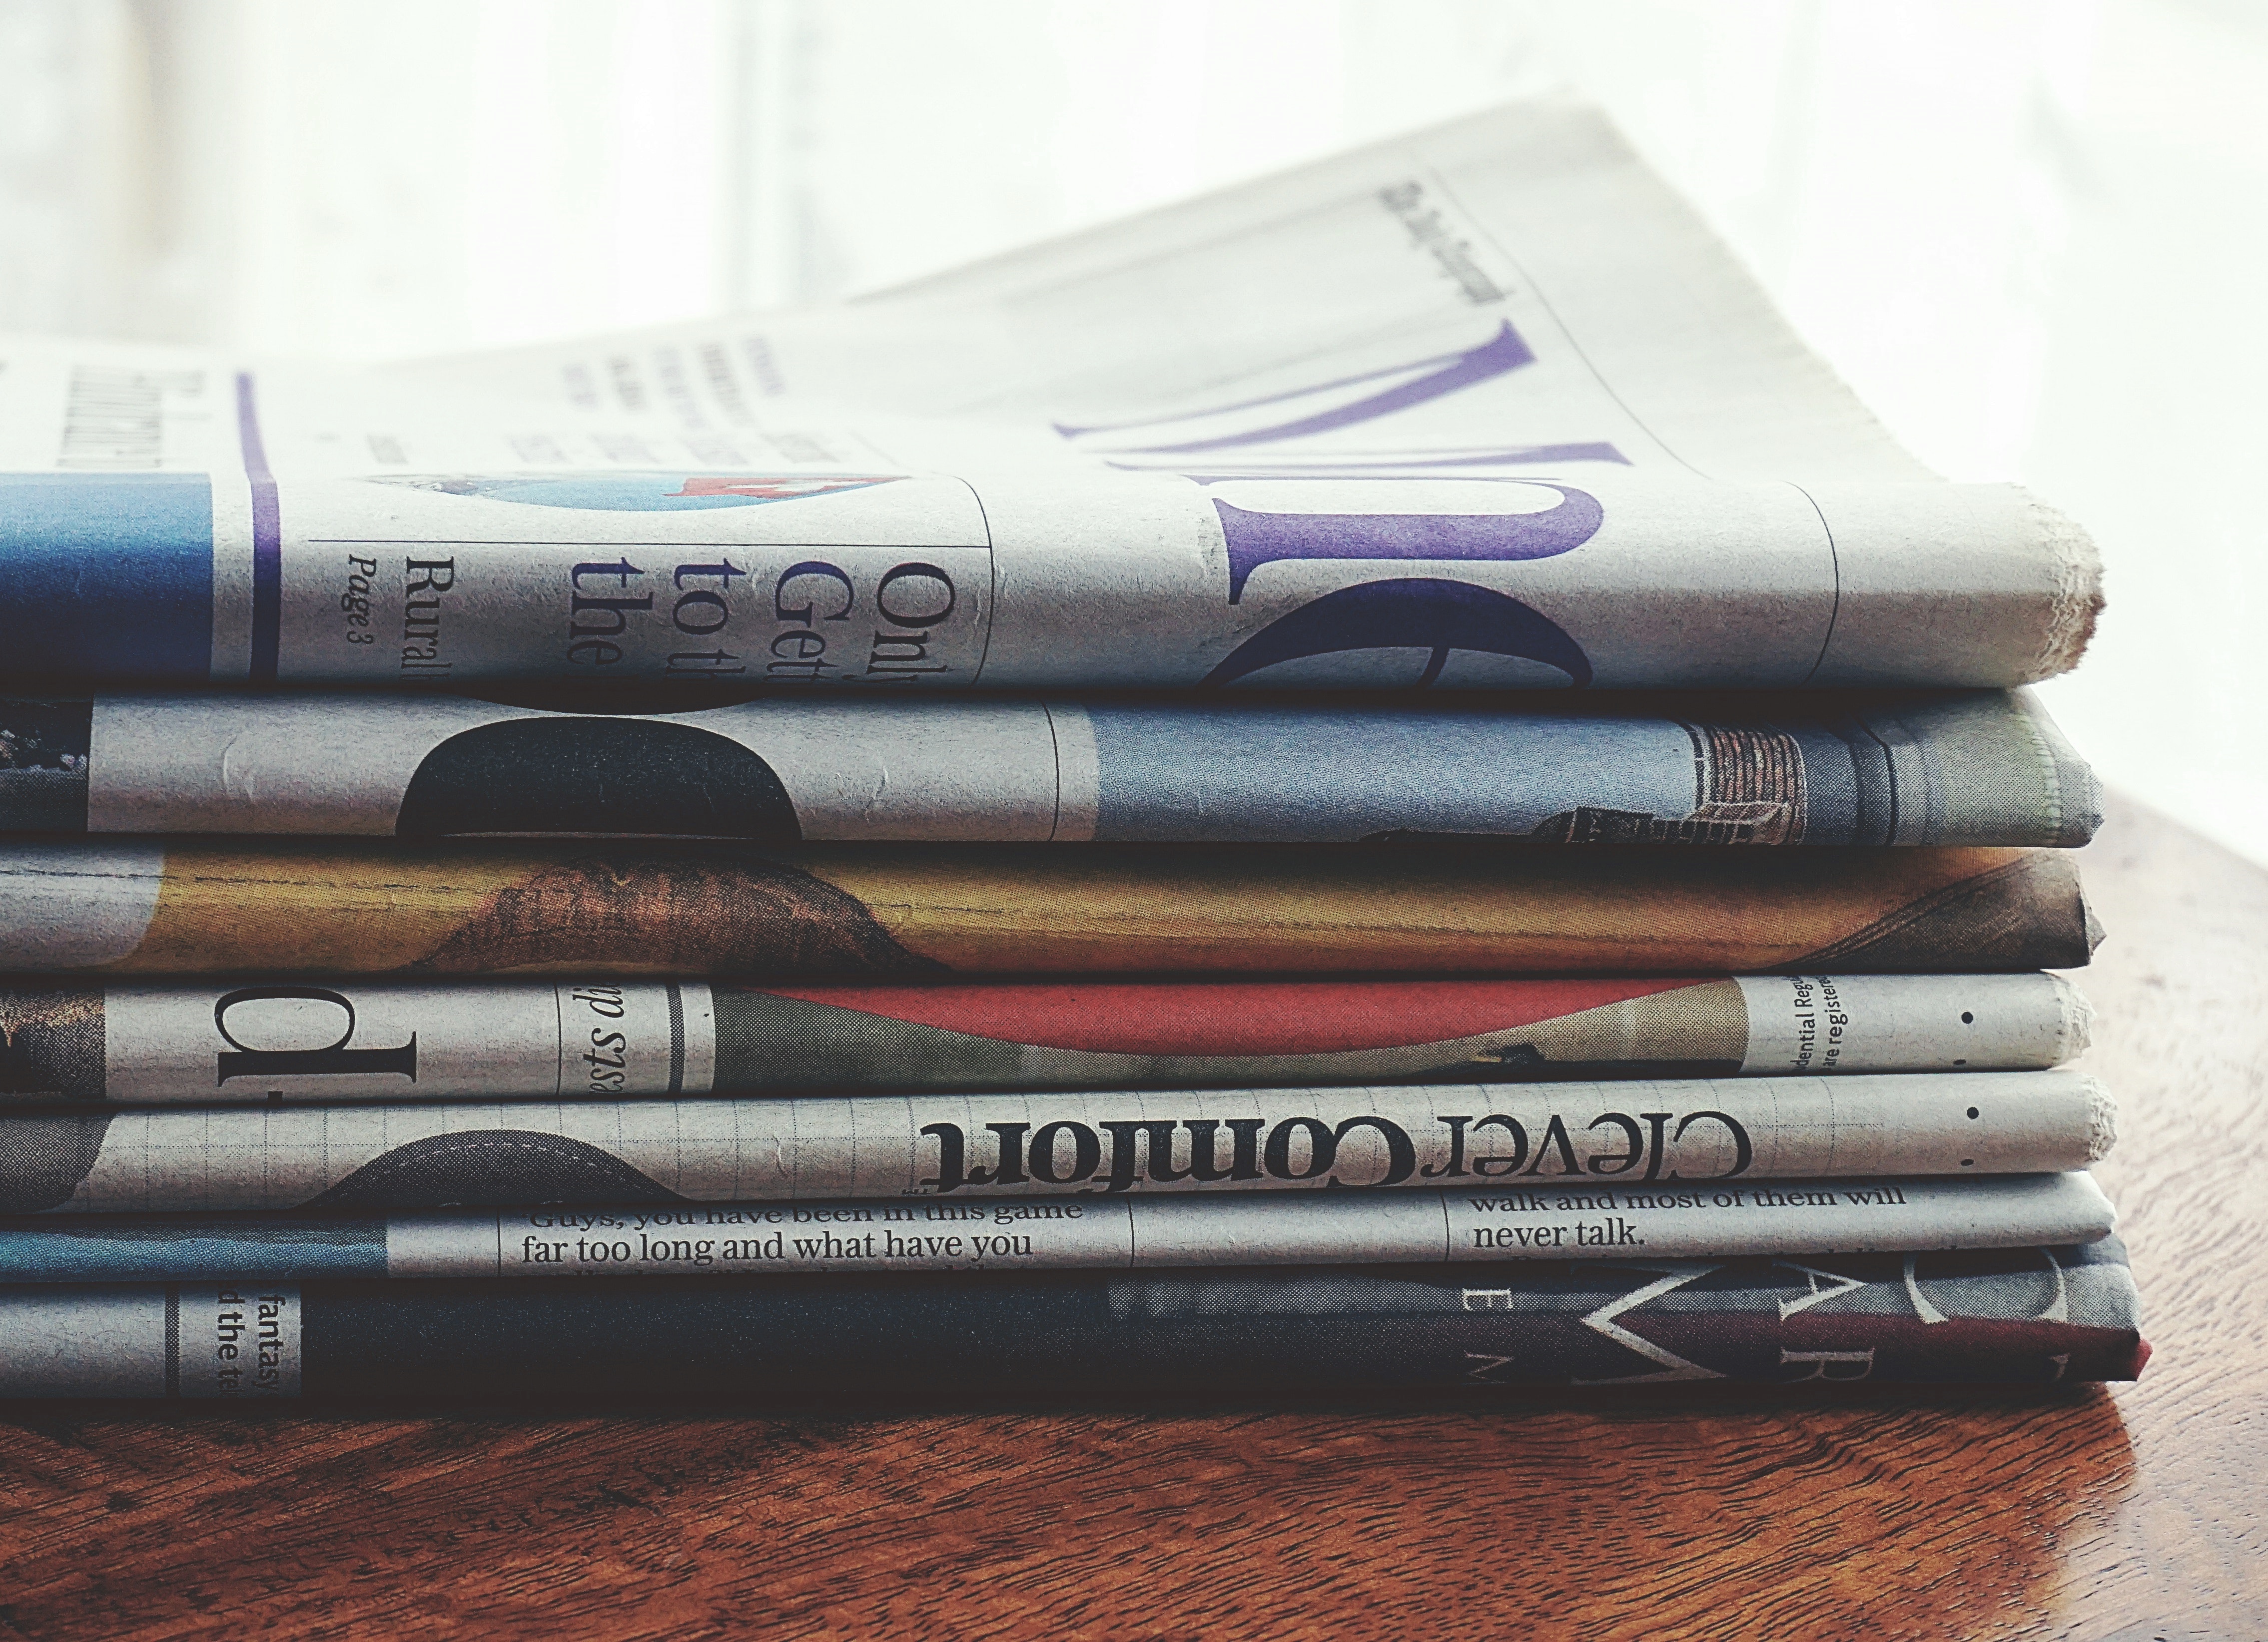 How to Get Media Attention for Your Startup When You Have No News: 4 Strategies